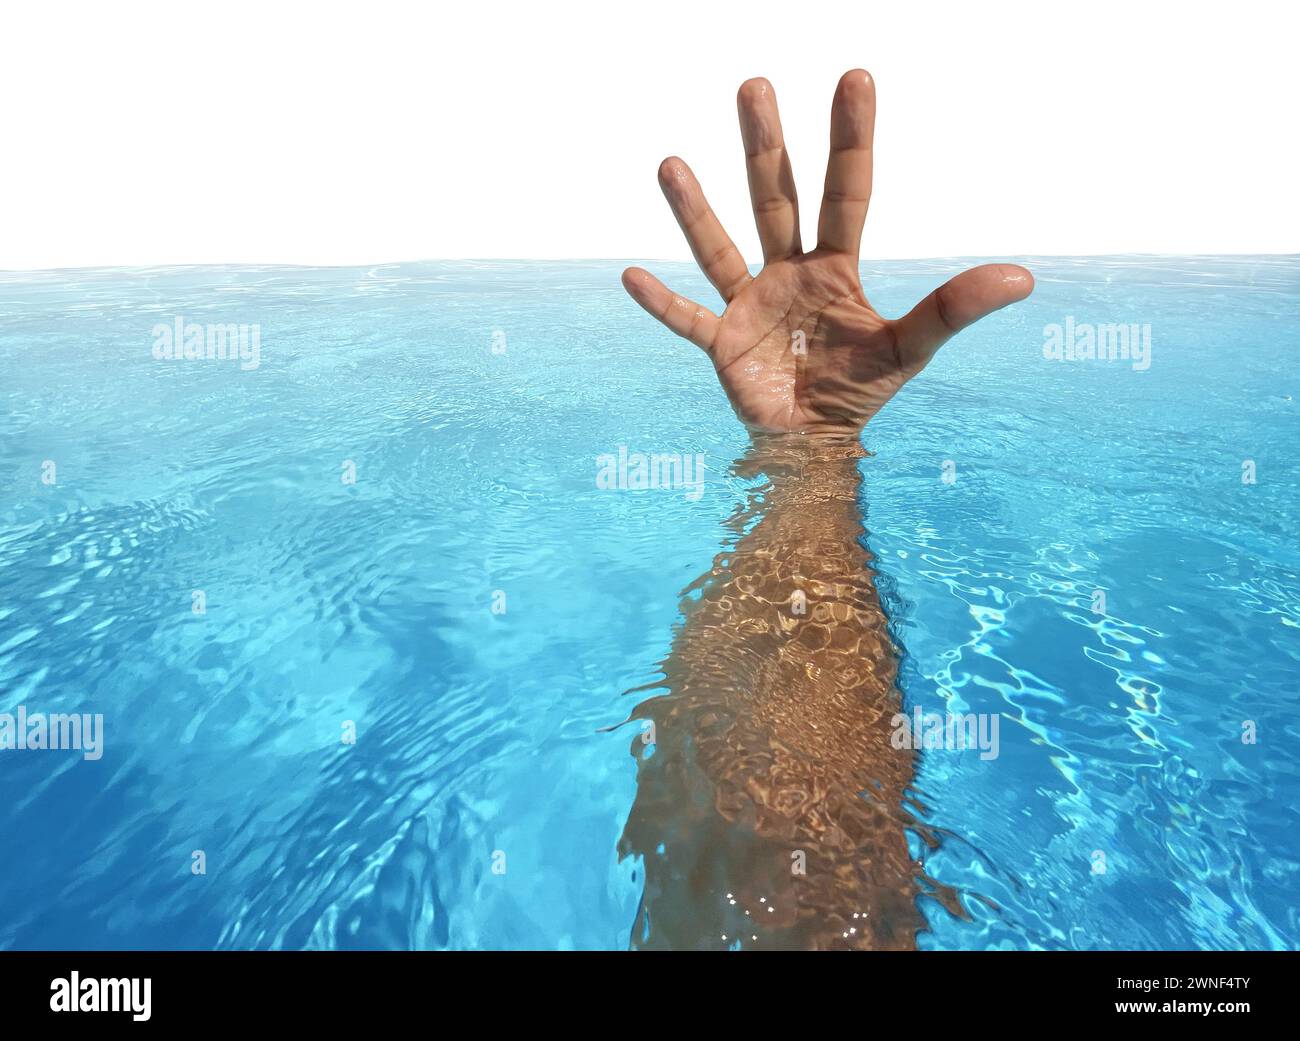 Drowning Background and Pool supervision and safety or water activity risk as a desperate human hand urgently reaching for help representing the dange Stock Photo